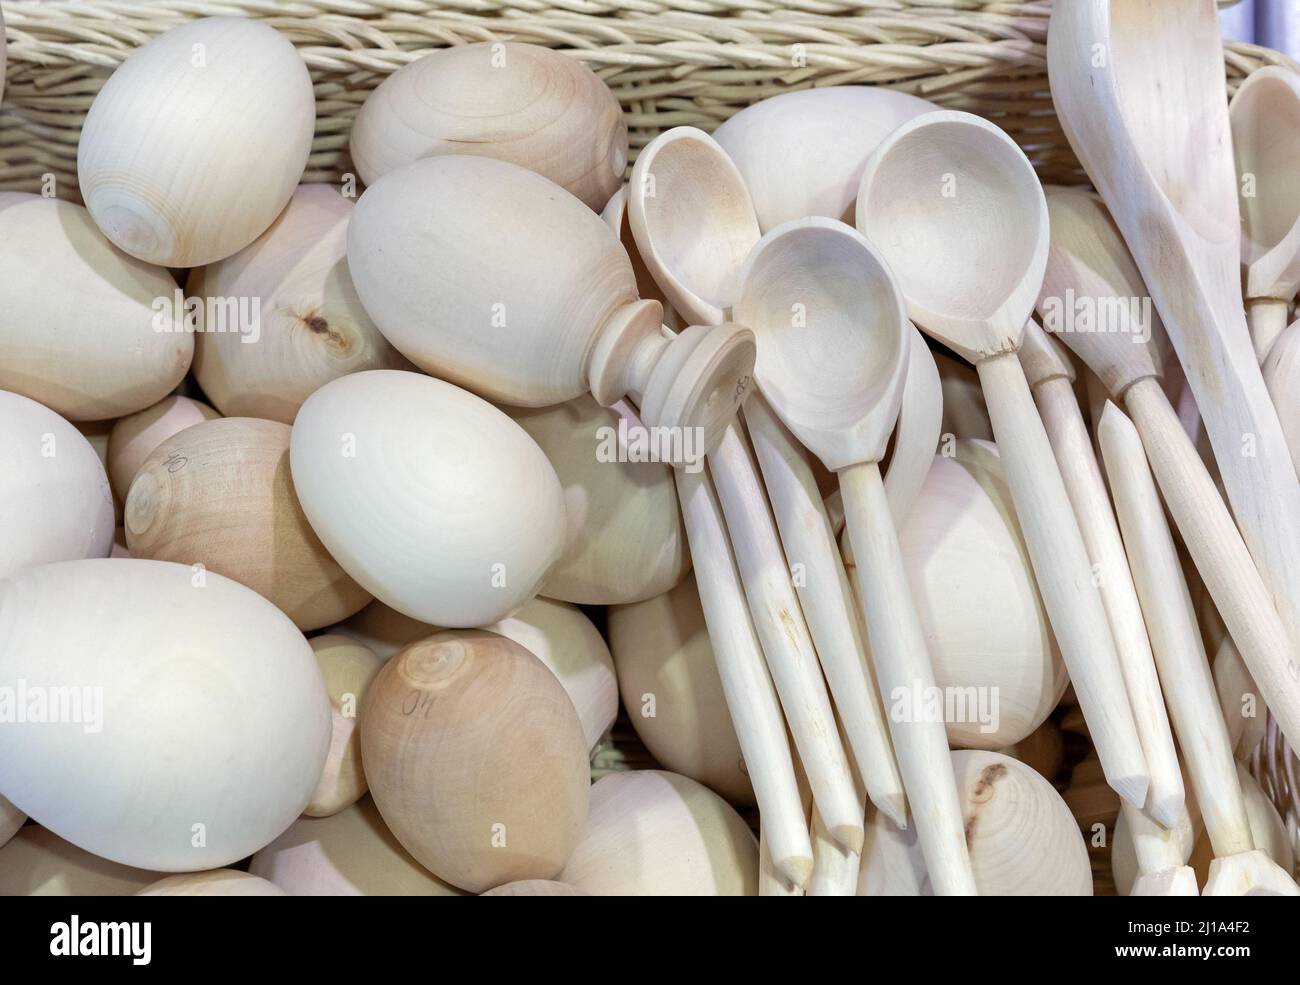 Wooden Easter eggs and wooden spoons for self-coloring with paints for the Easter holiday. Stock Photo